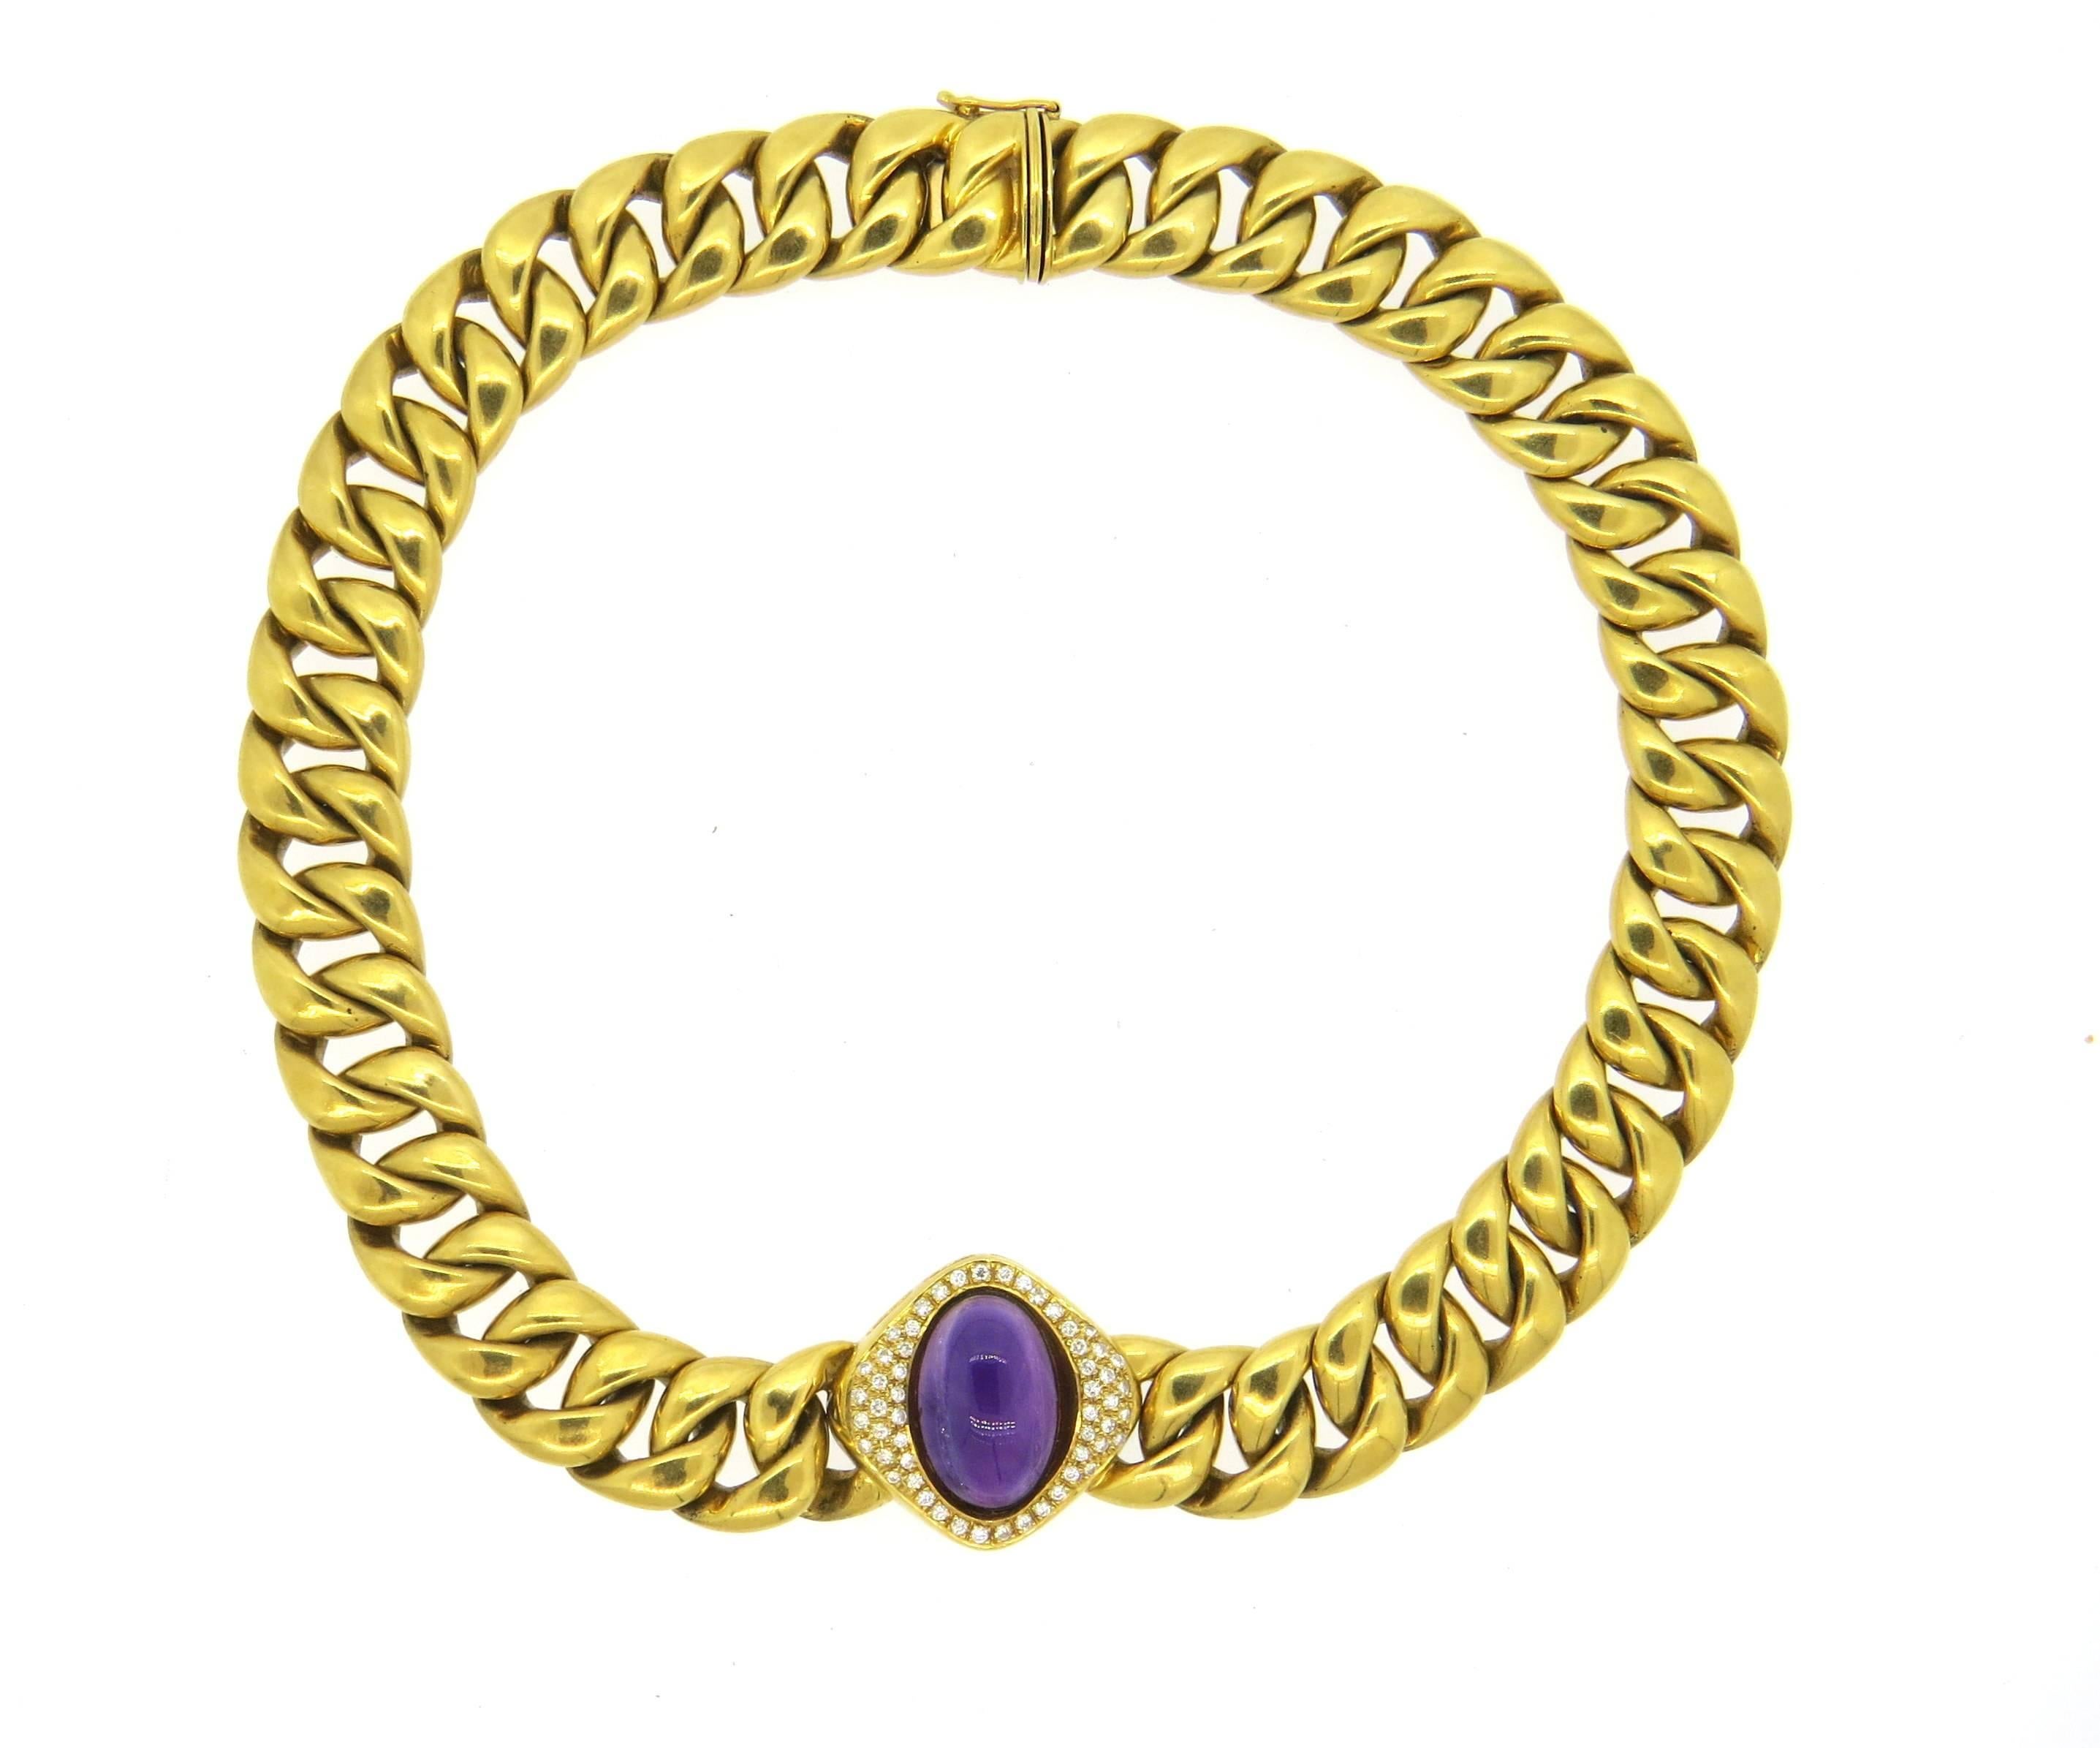 Massive 18k yellow gold necklace, featuring link design, set with an approximately 12-15ct amethyst, surrounded with approx. 1.00ctw in GH/VS diamonds. Necklace is 15 3/4